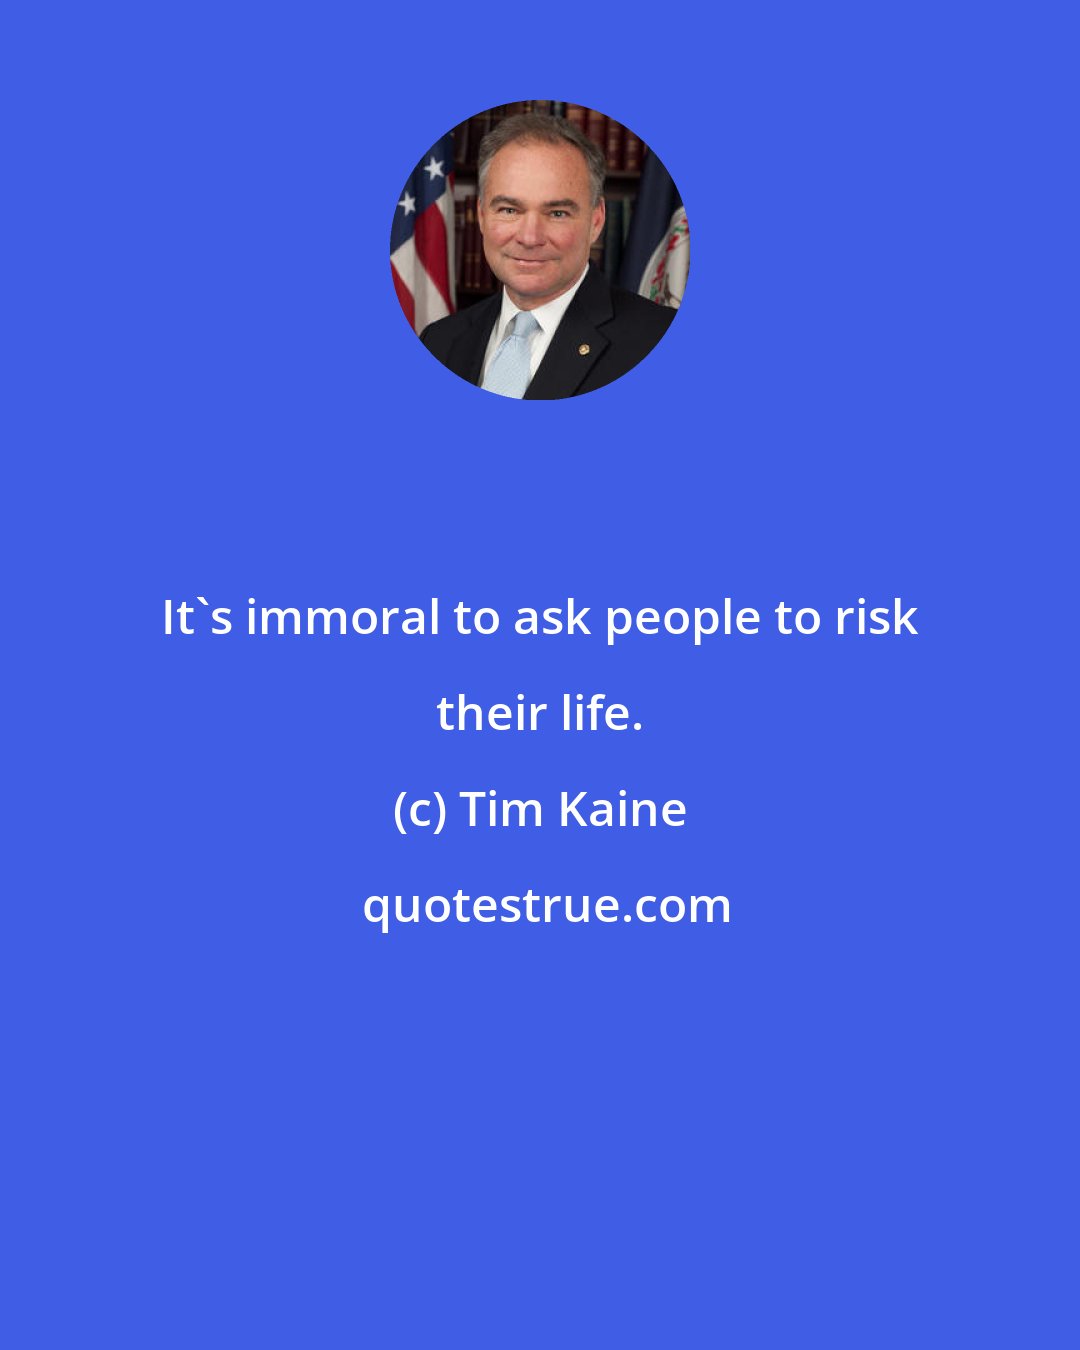 Tim Kaine: It's immoral to ask people to risk their life.